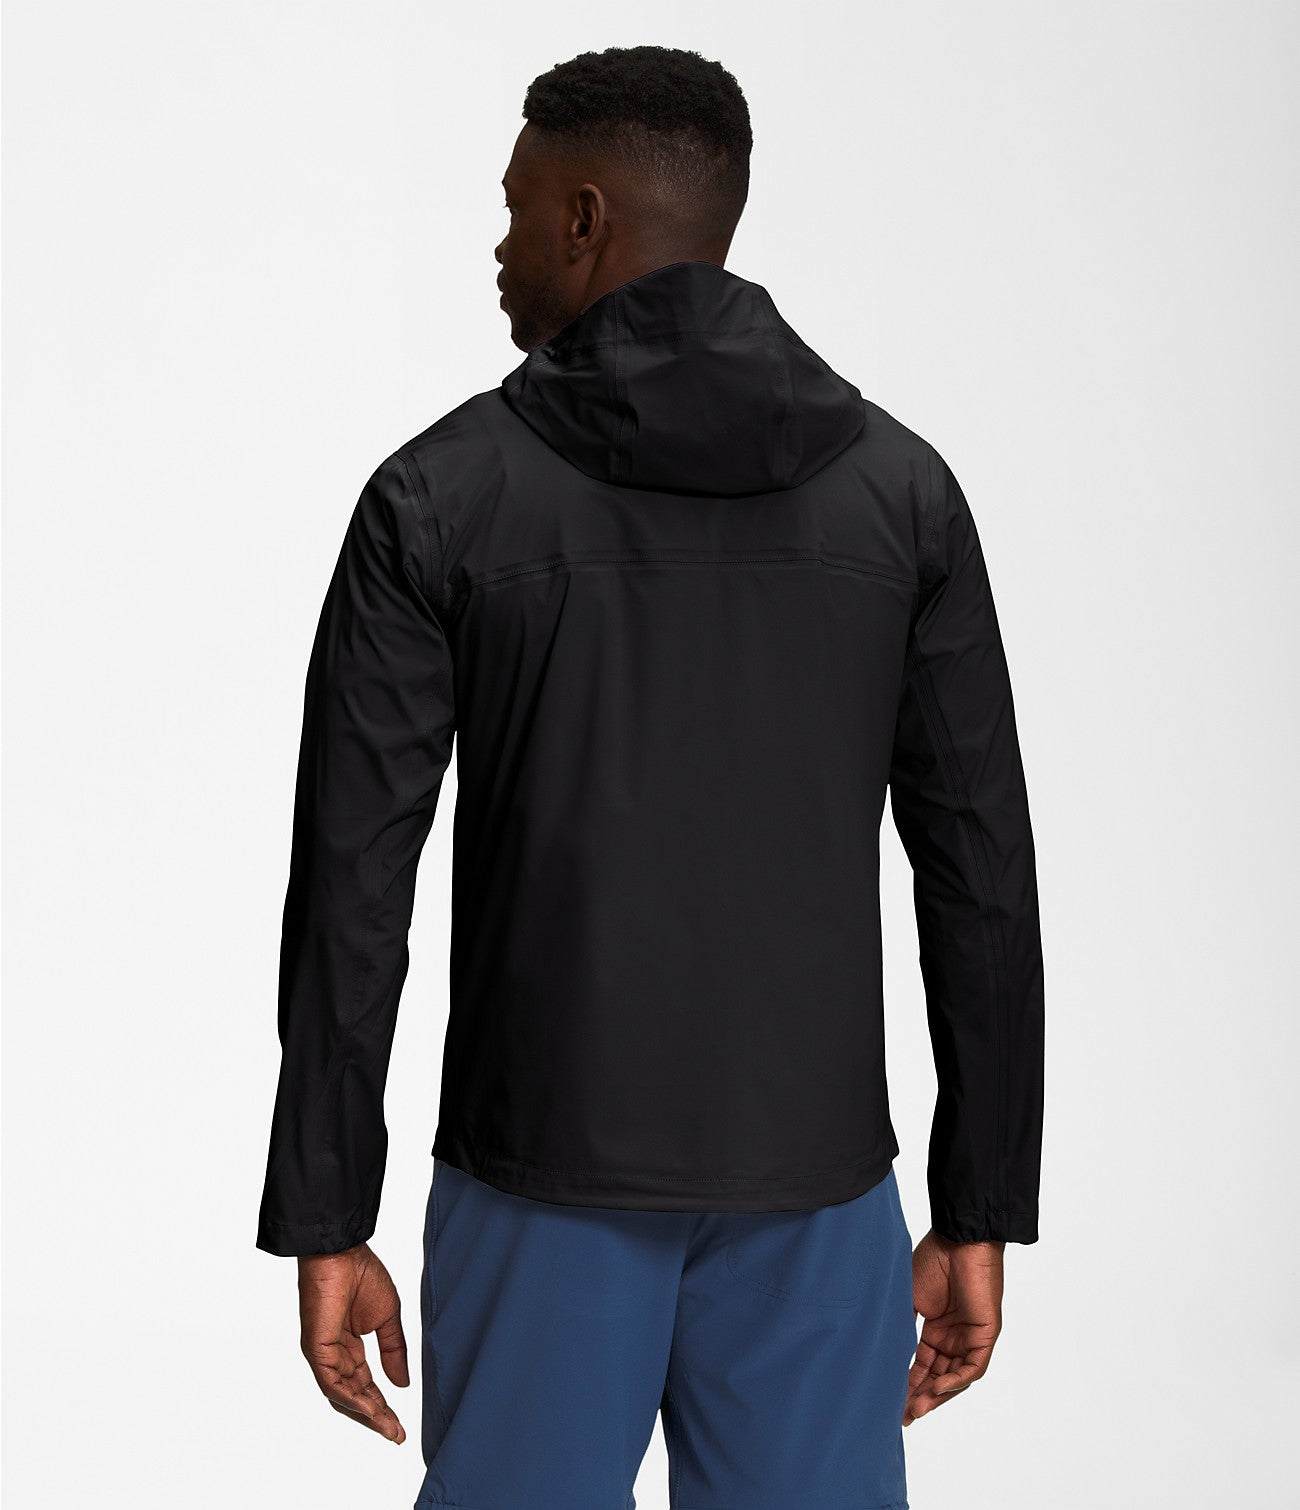 The North Face Men's West Basin DryVent Jacket